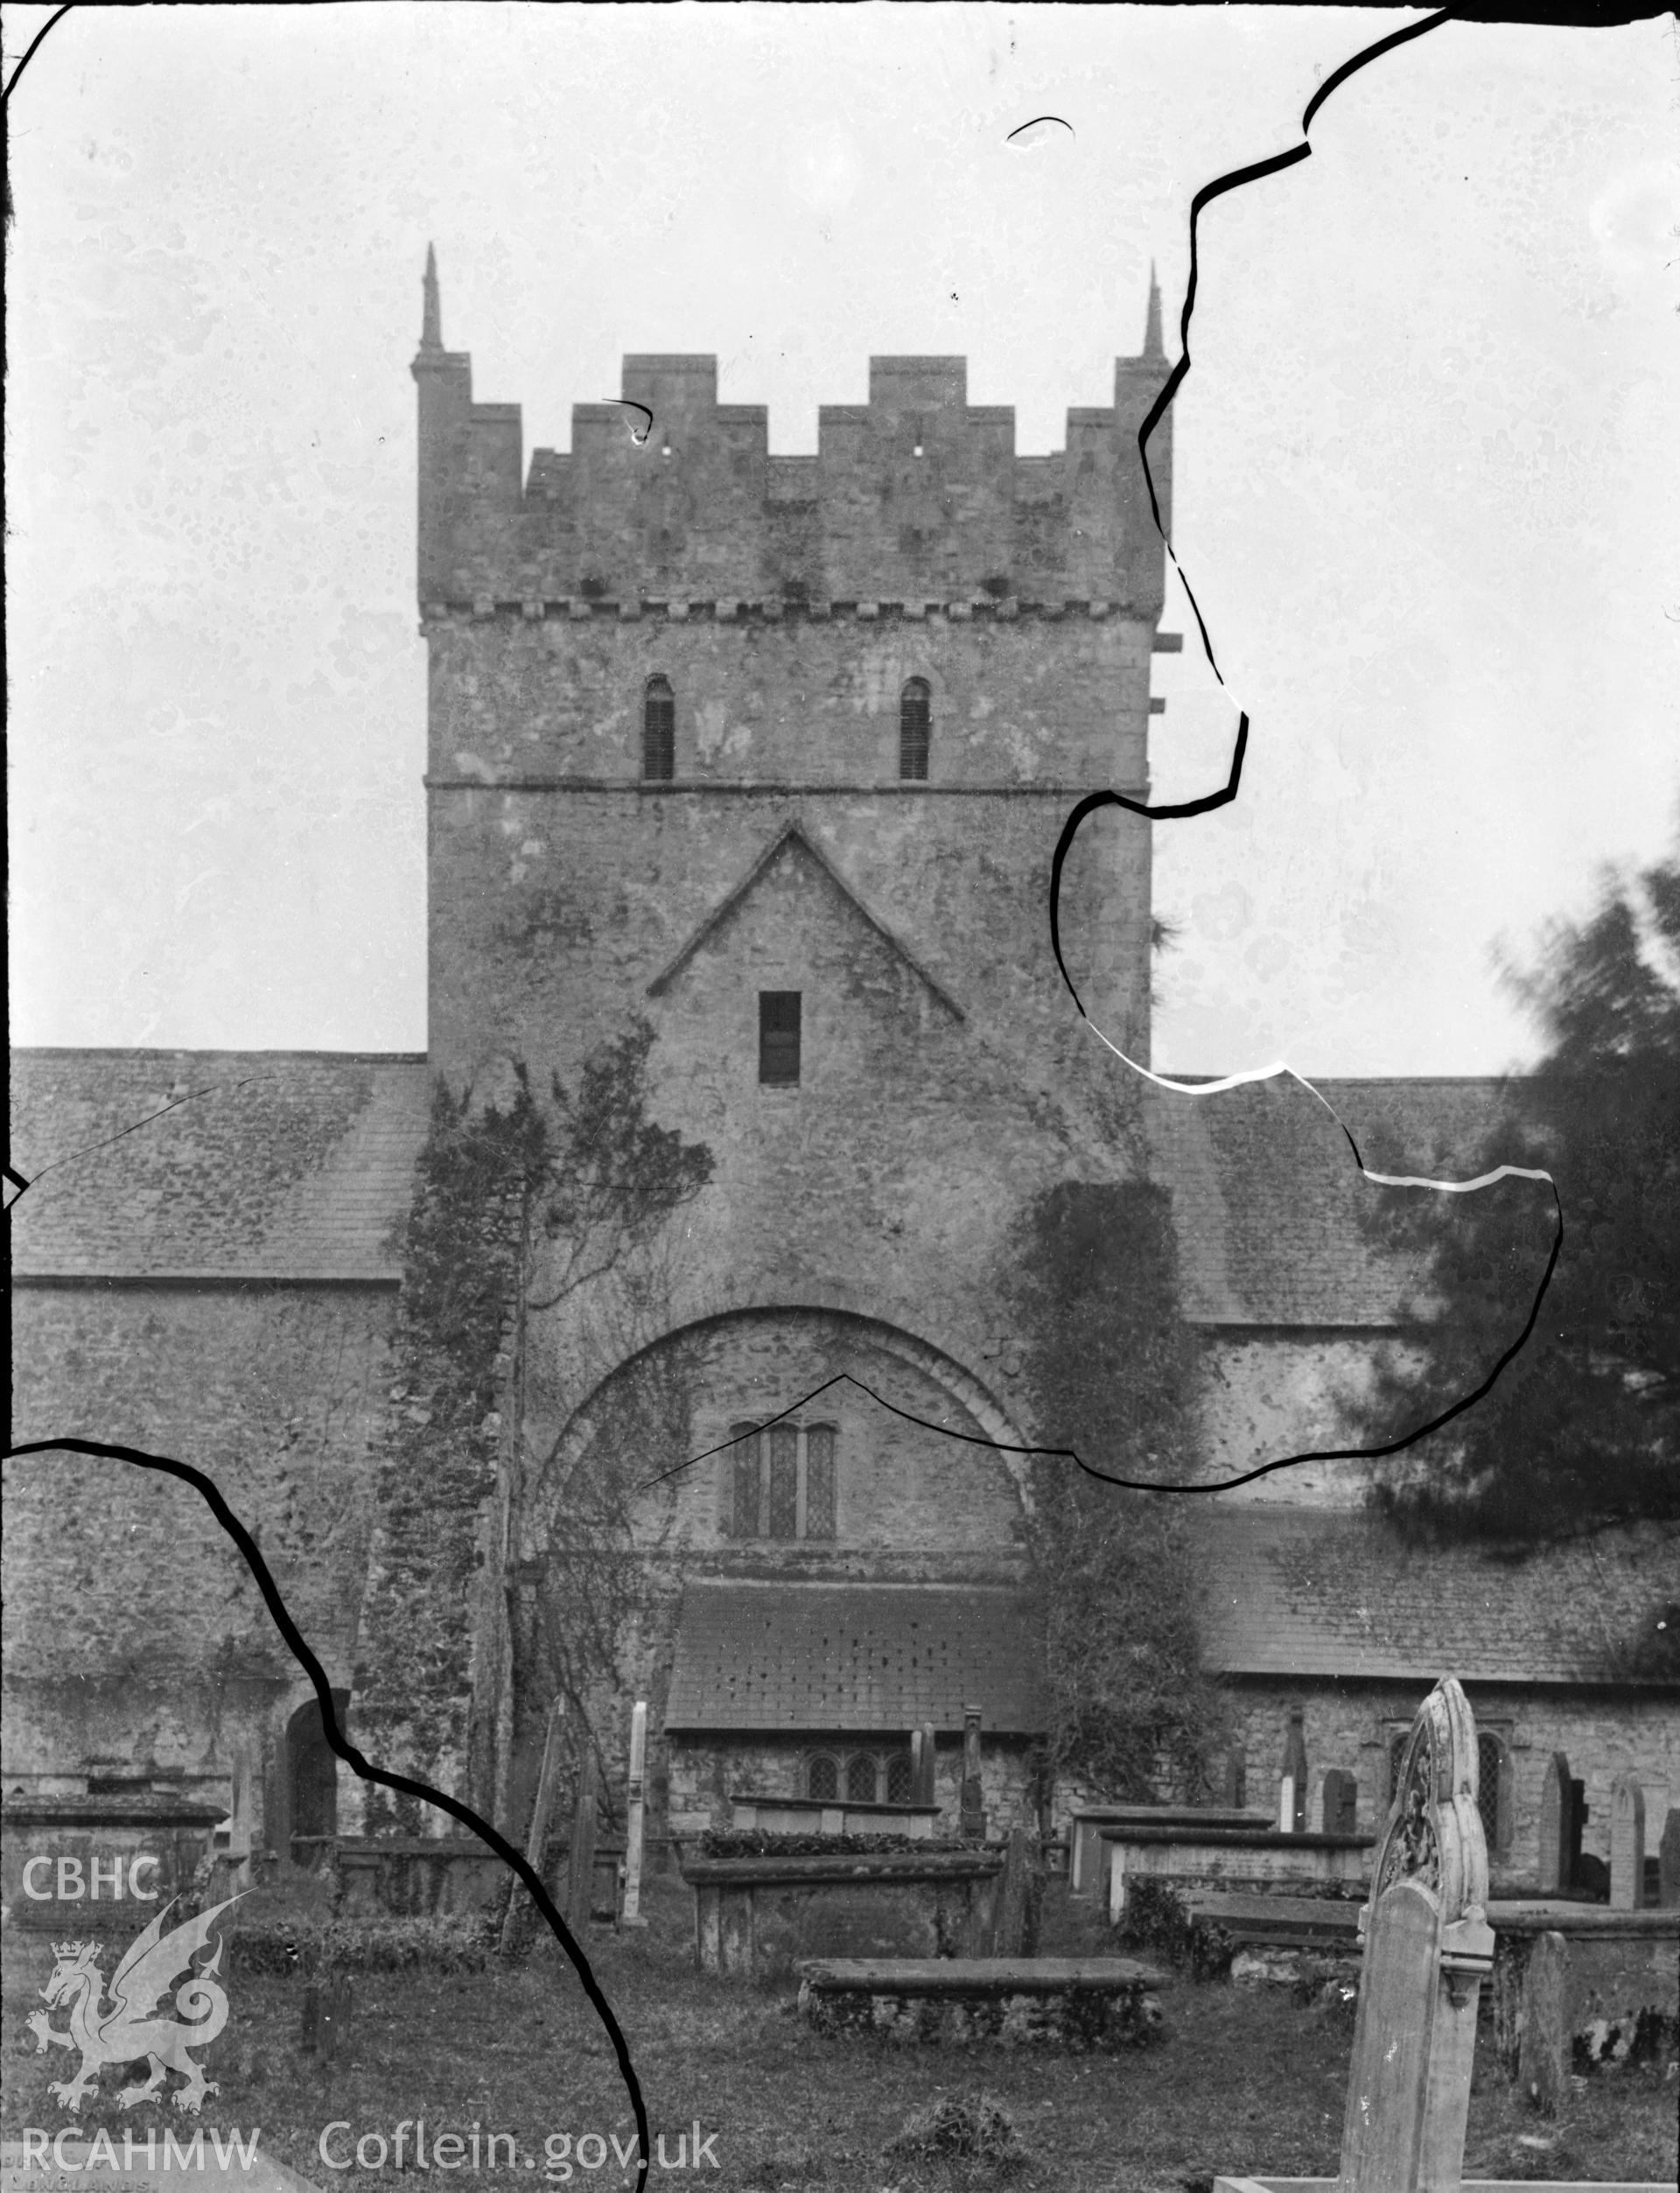 Black and white photo showing Ewenny Priory